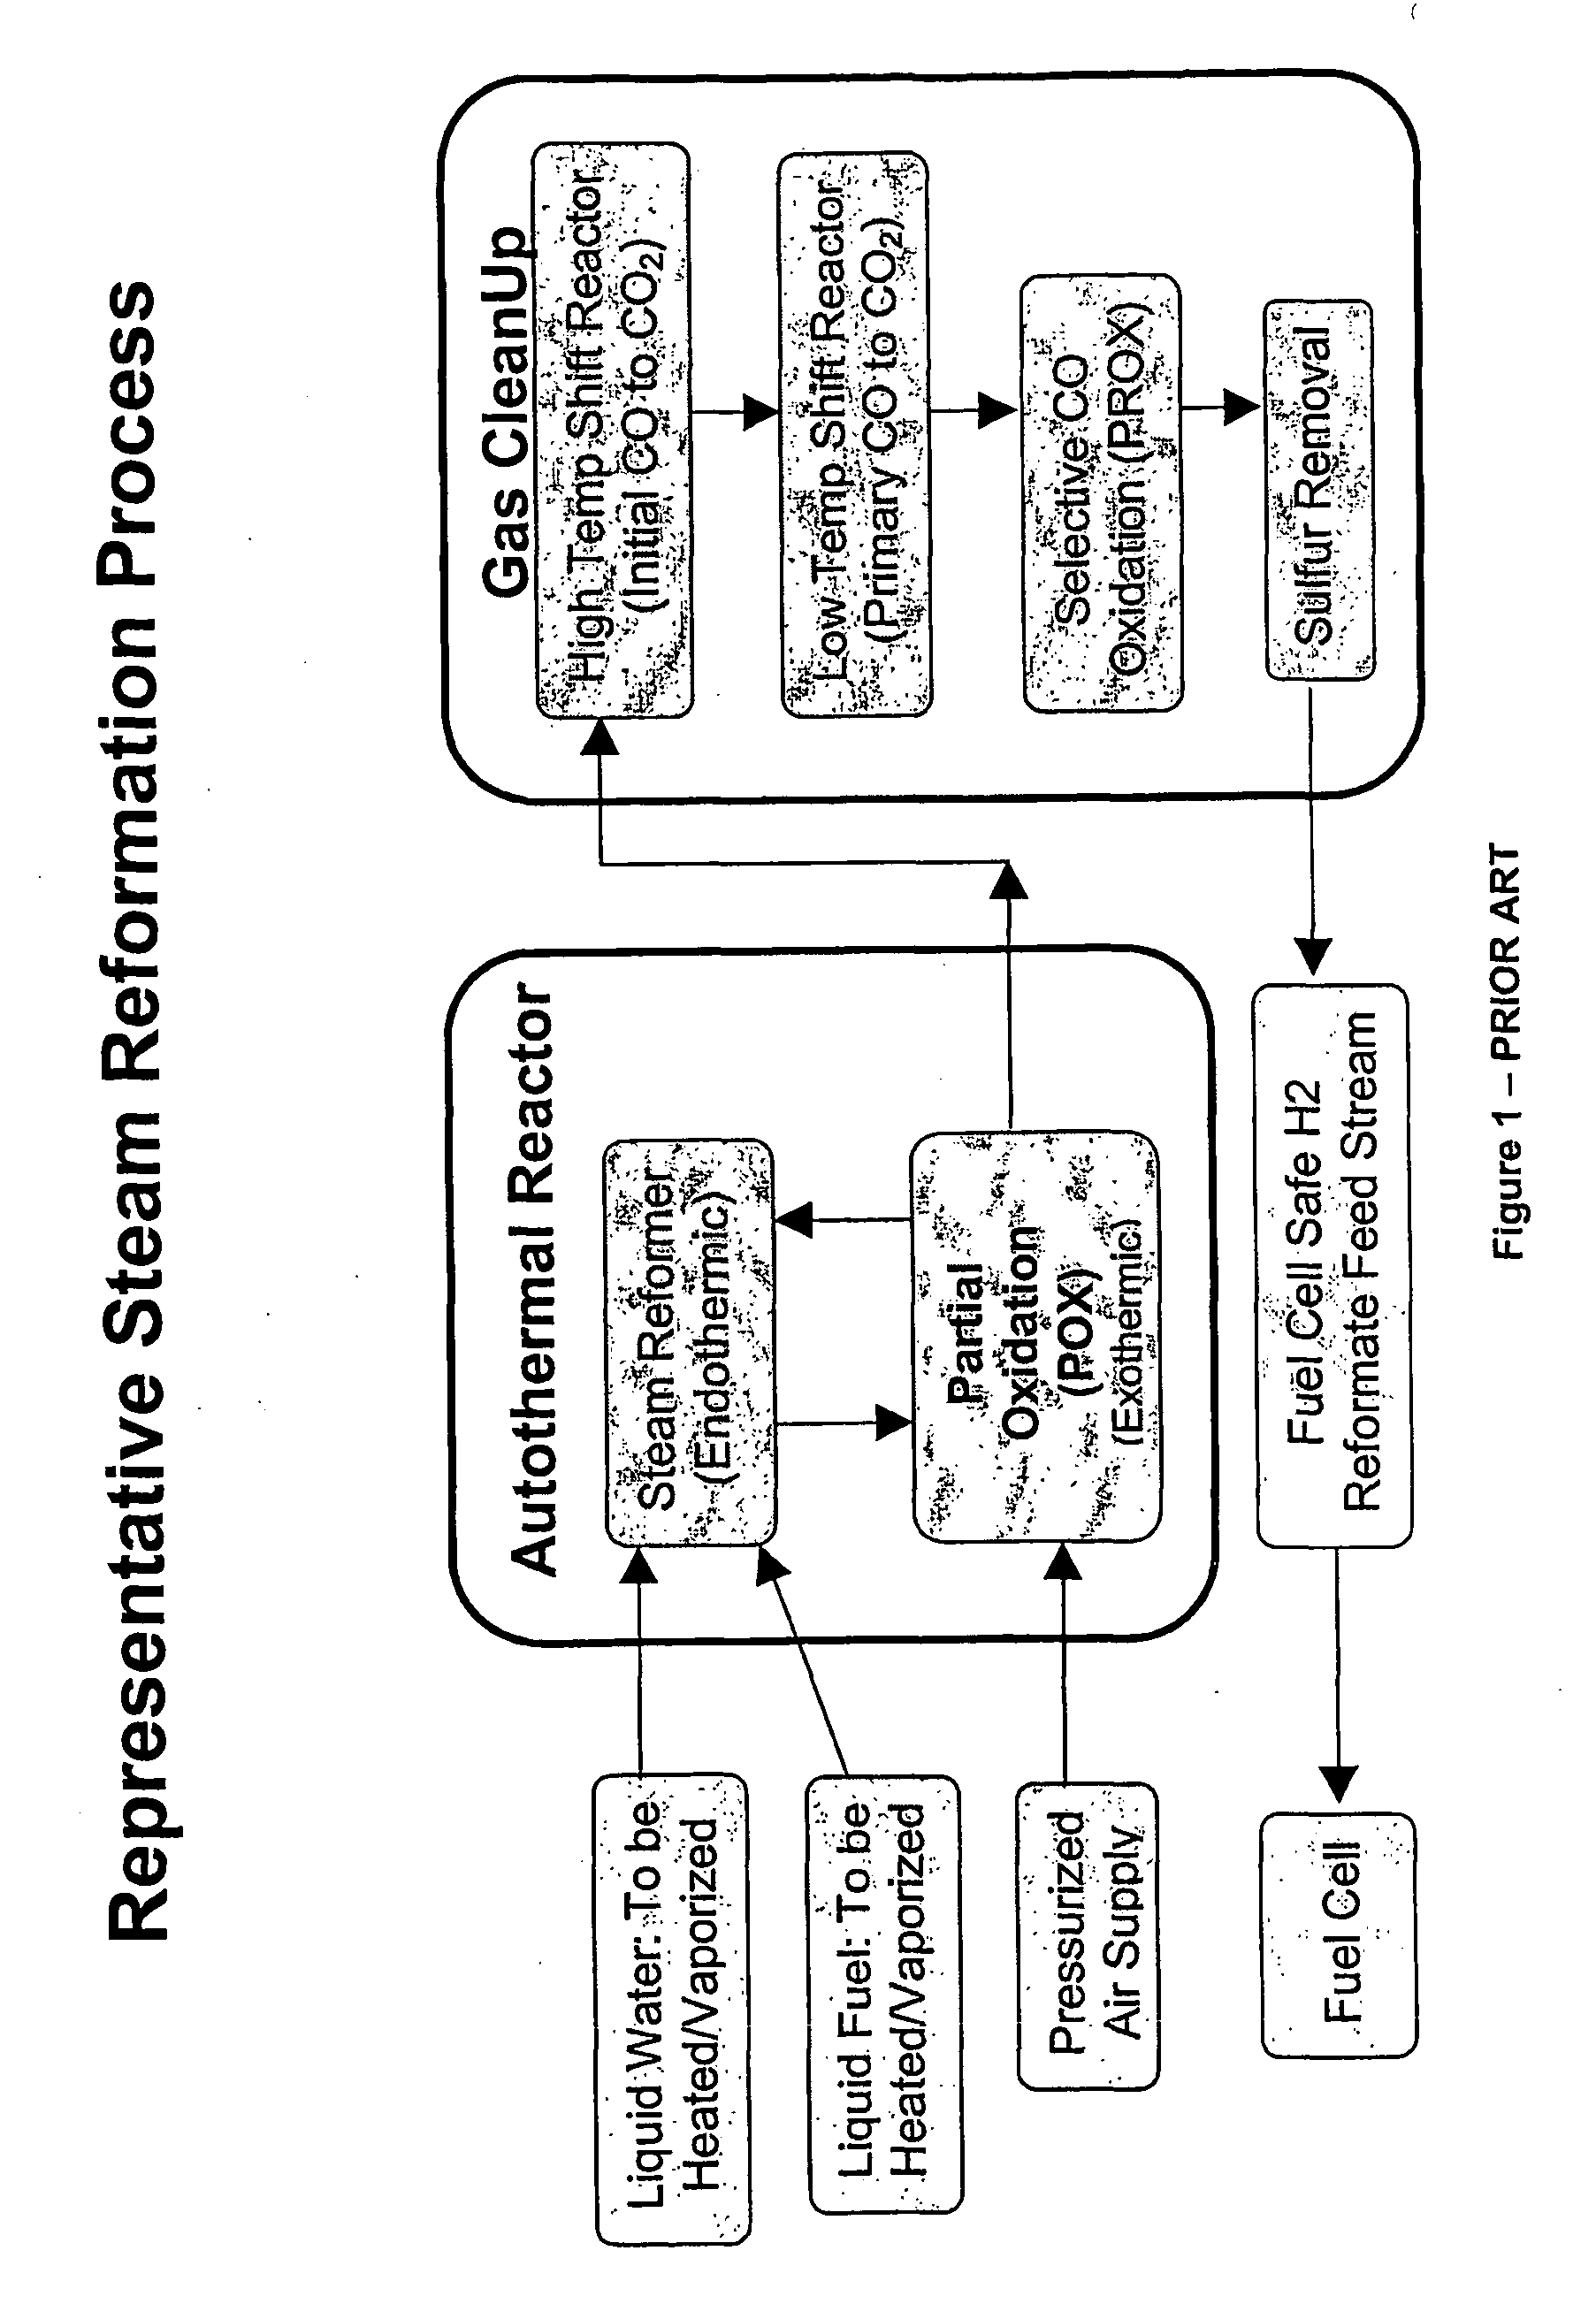 Methods of Improving thermal transfer within a hydrocarbon reformig system